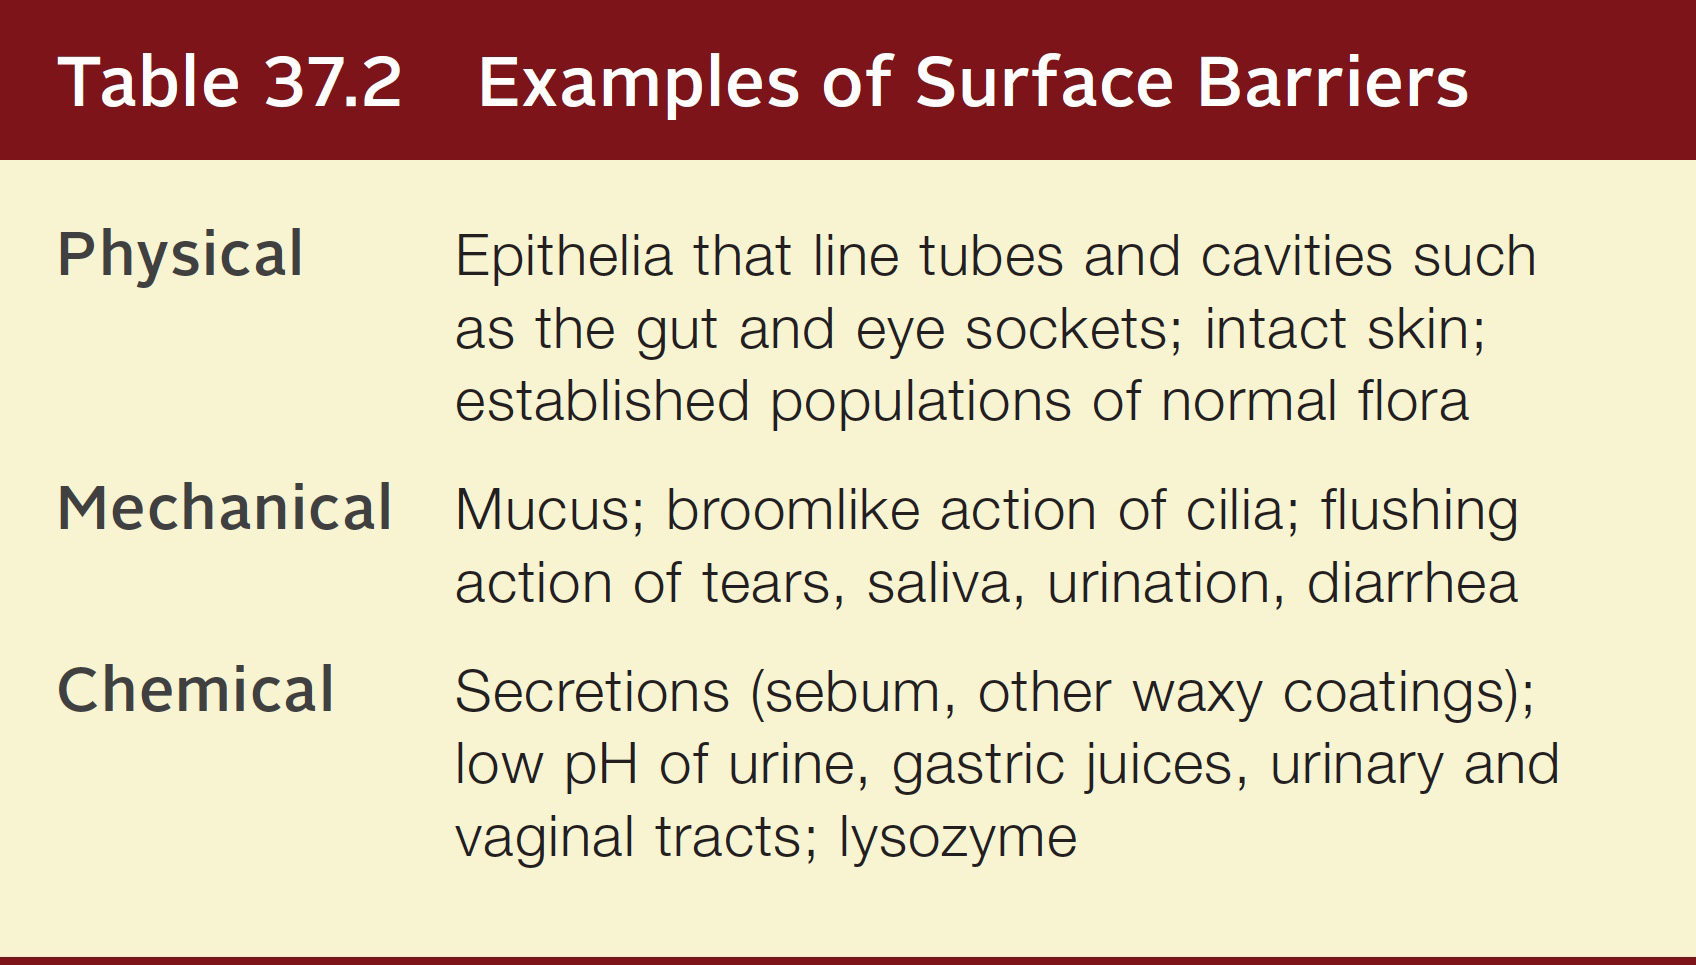 Examples of Surface Barriers